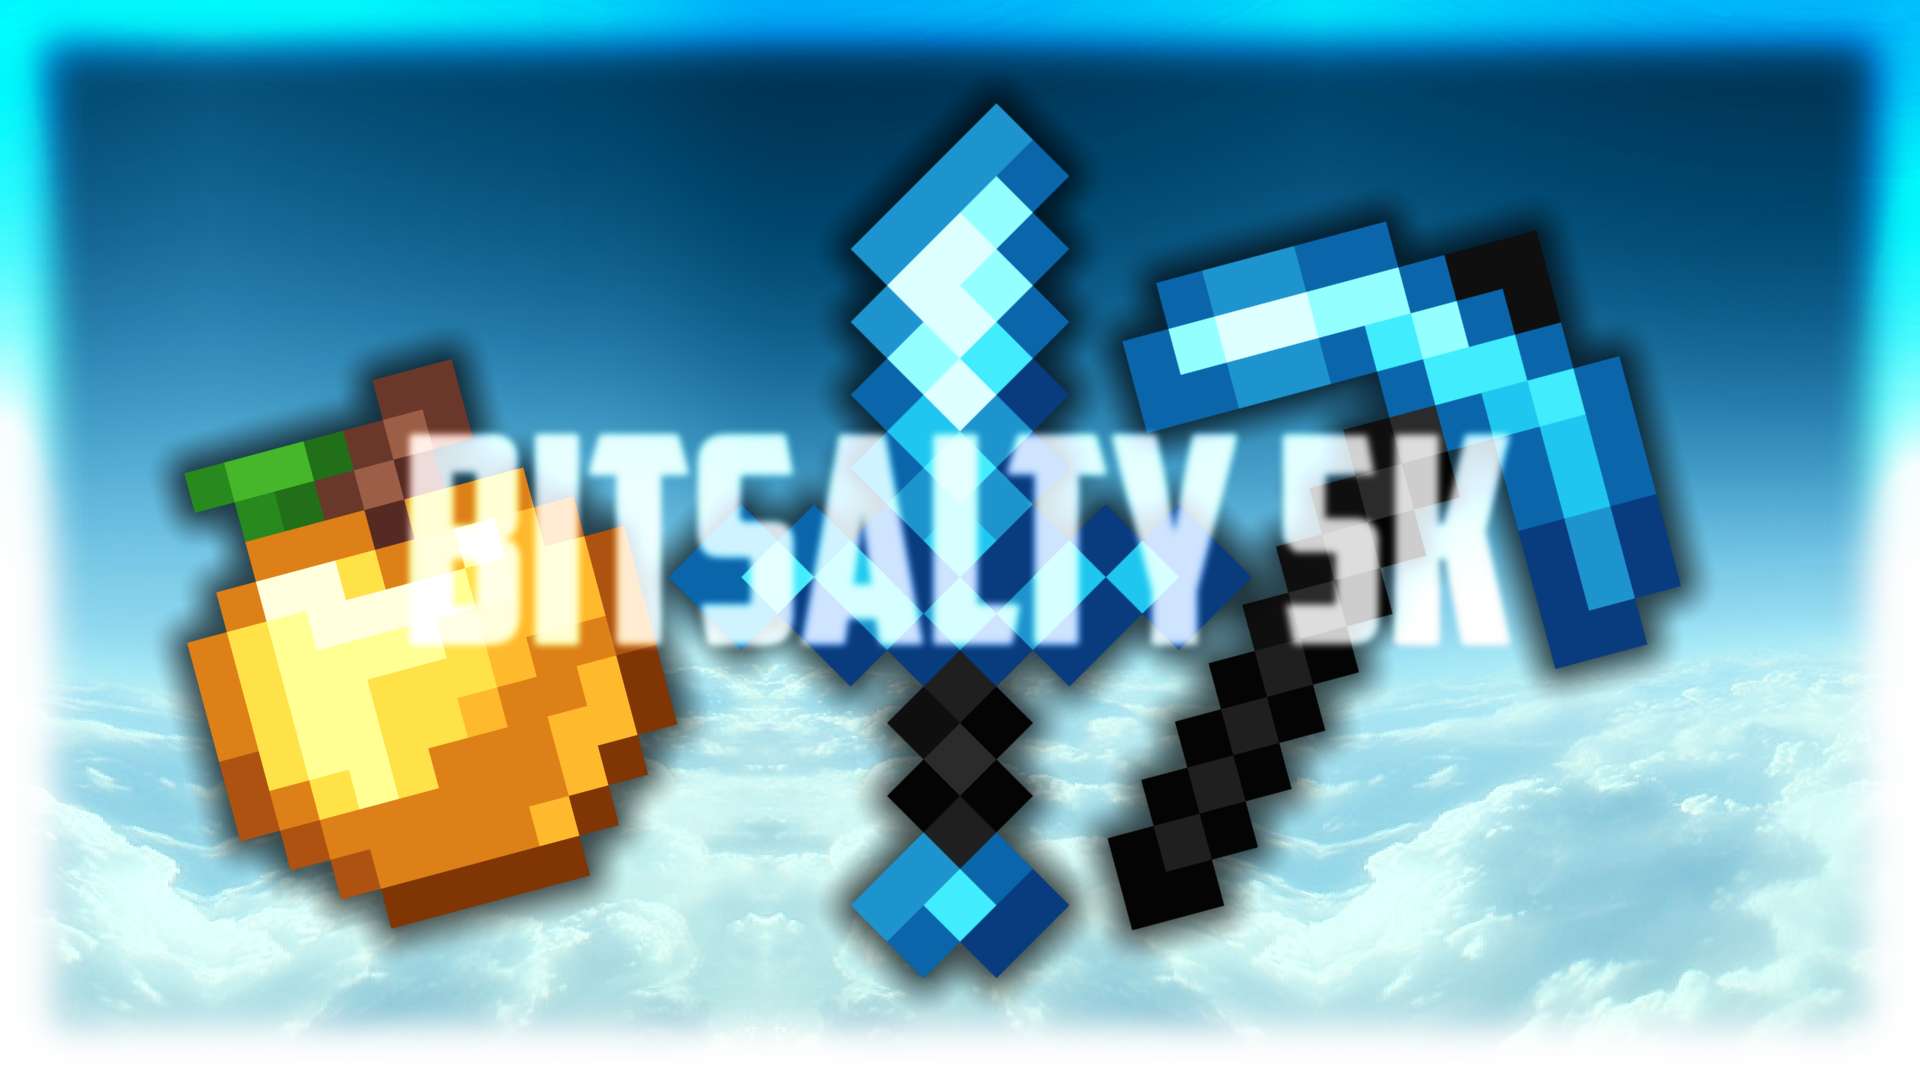 BitSalty 5k 16x by Zlax on PvPRP